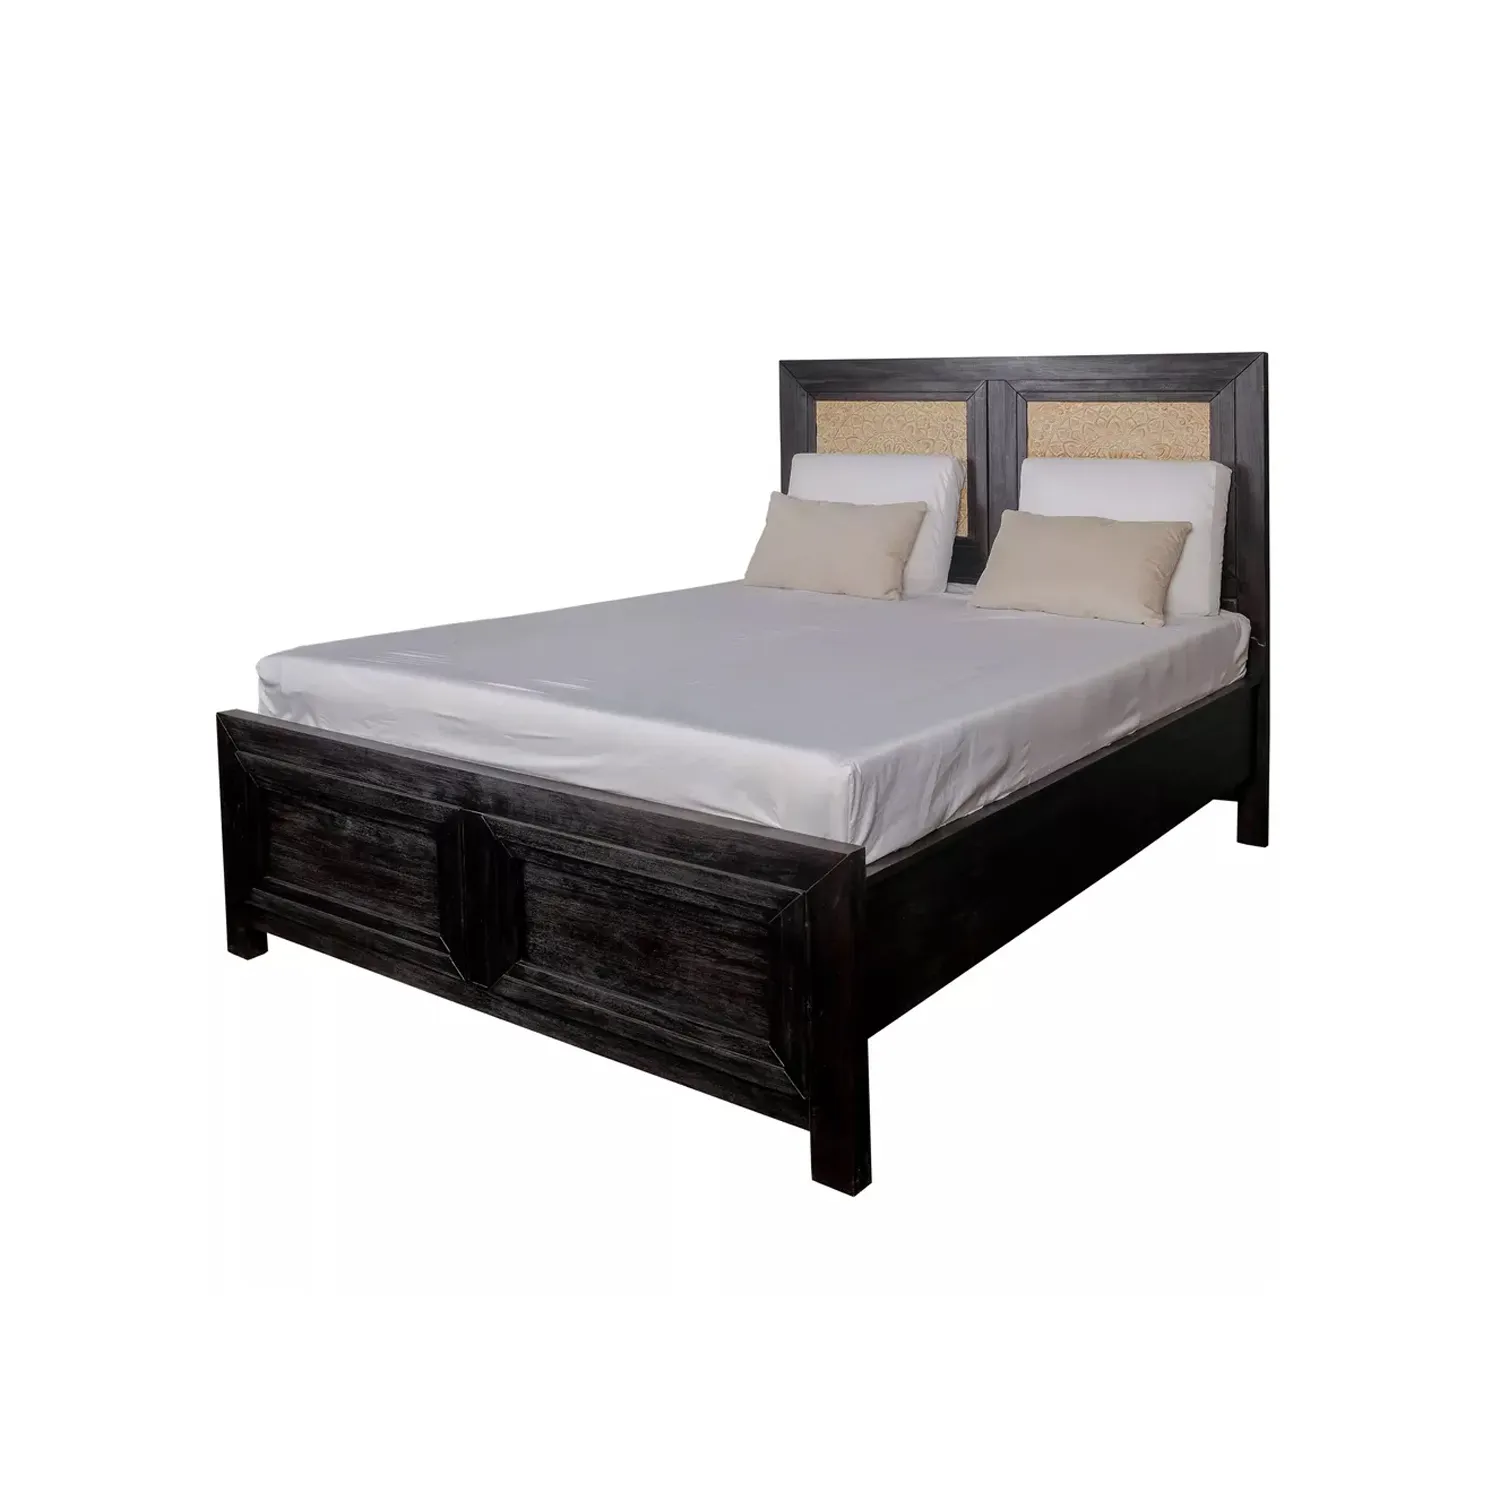 100% Export Oriented Wholesale Cheap Price Double Bed Modern Simple Bedroom Furniture Wooden Whitewash Bed From Indonesia